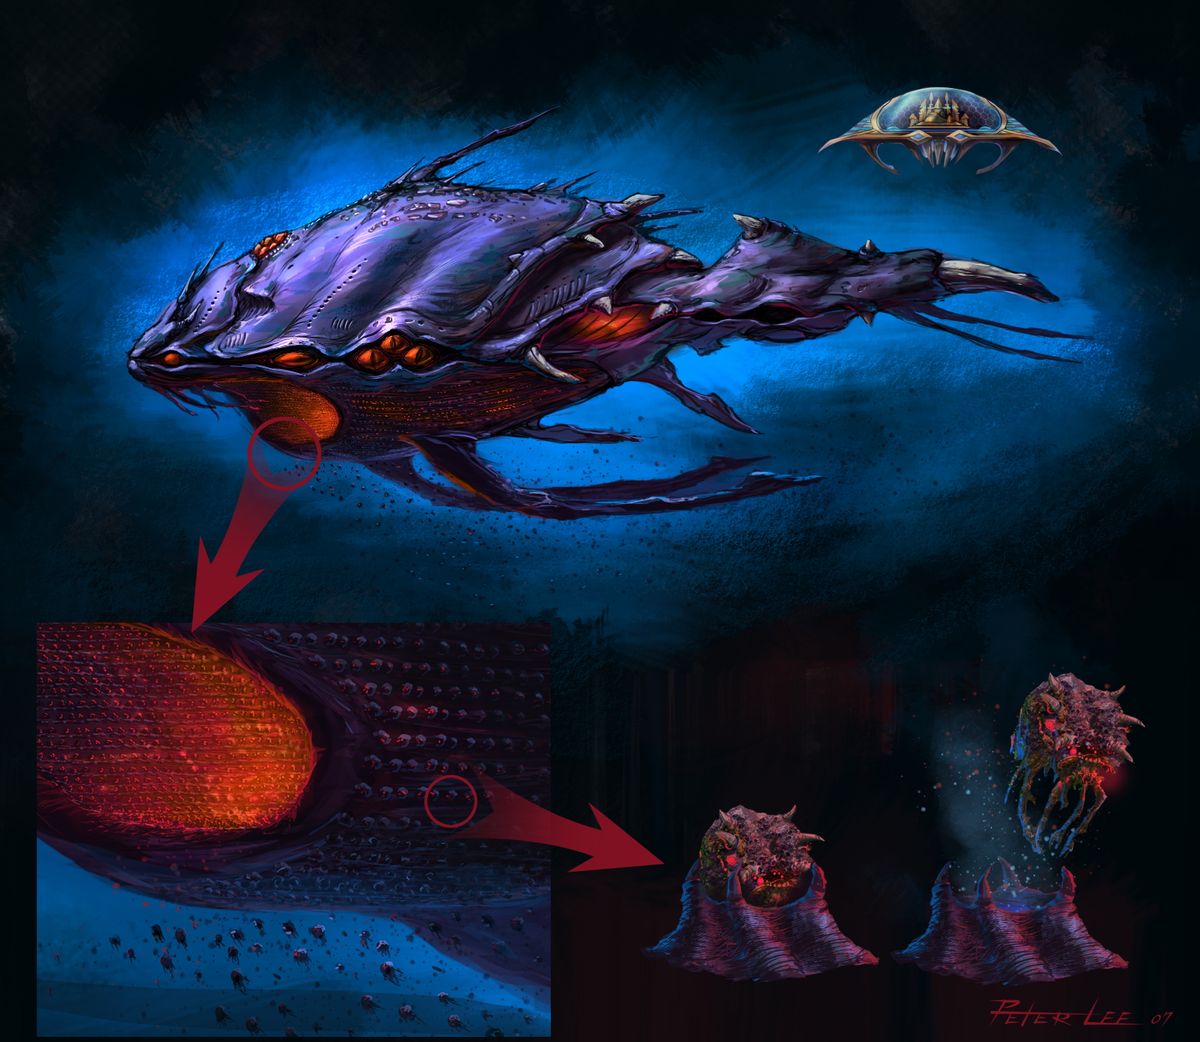 Check out this never-before-seen StarCraft 2 concept art | PC Gamer